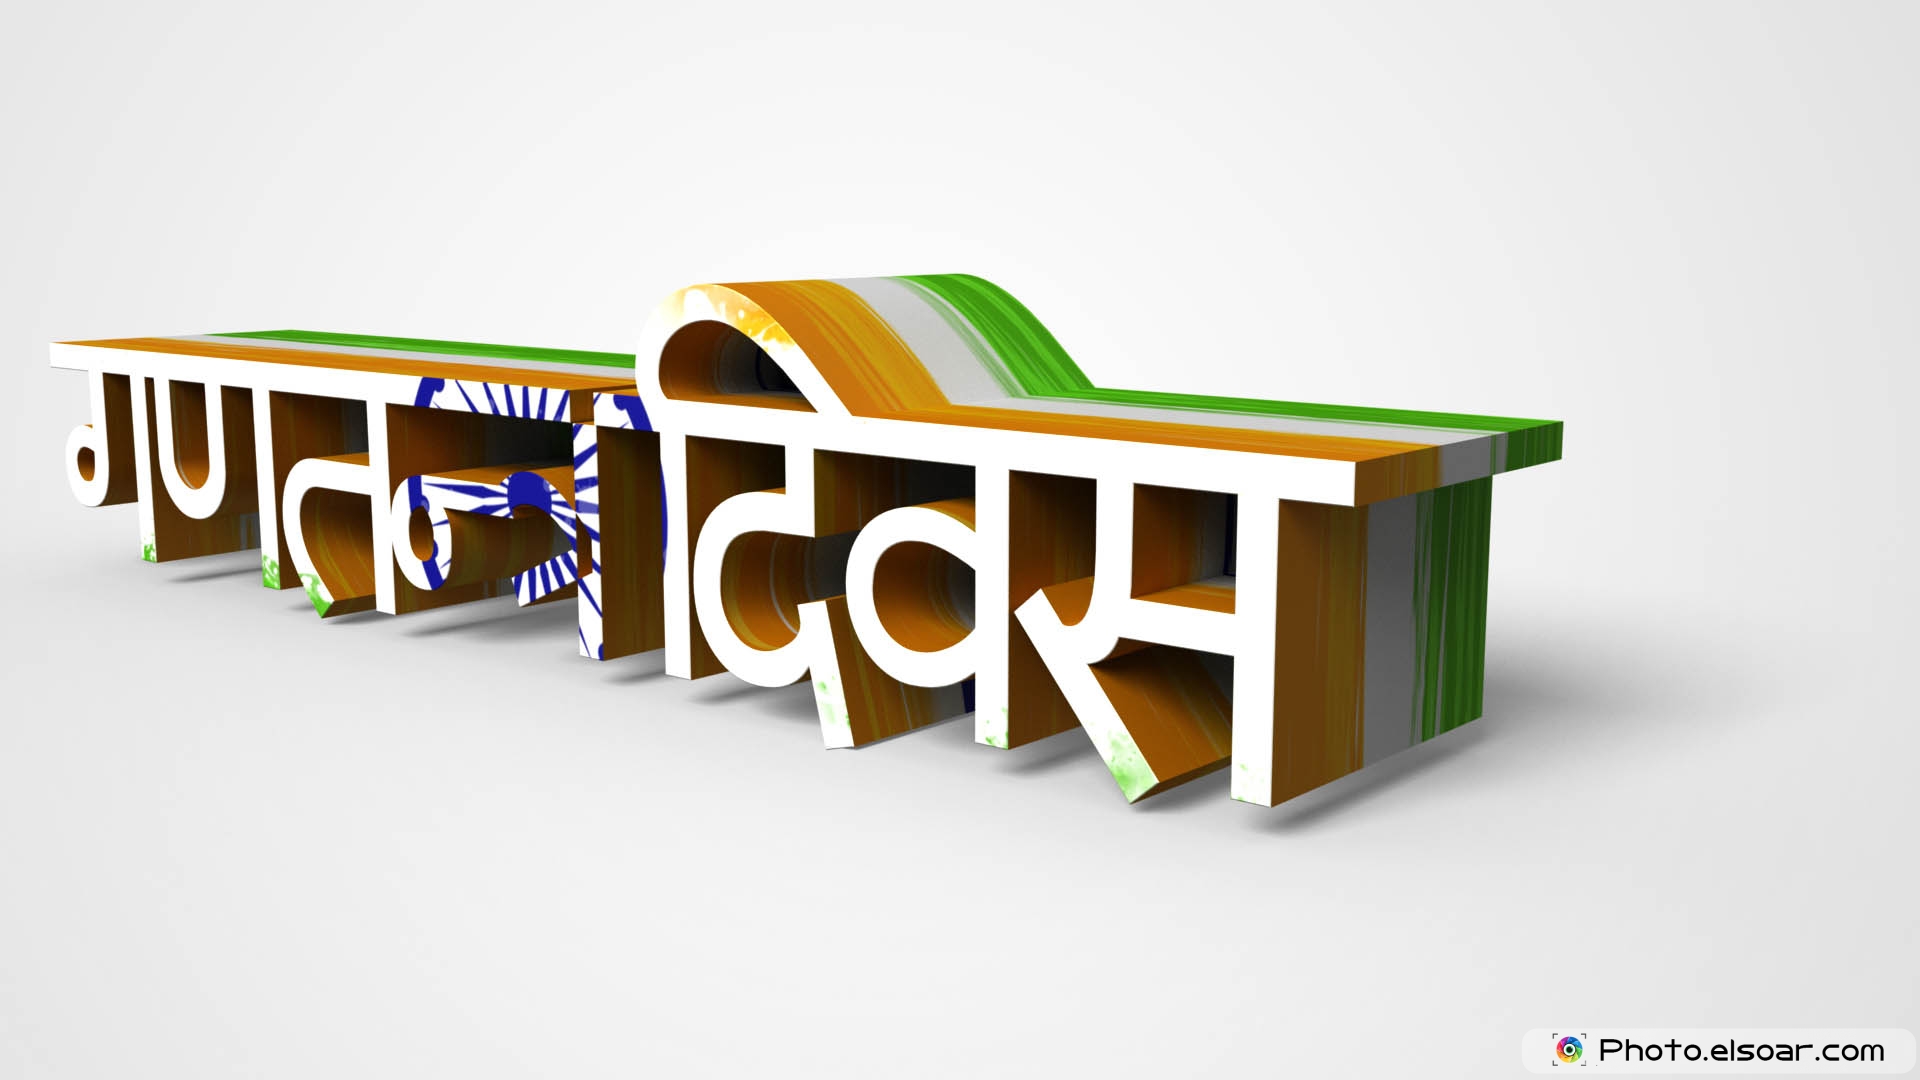 3d Image Of Republic Day In Hindi - Full Hd Republic Day 2019 , HD Wallpaper & Backgrounds